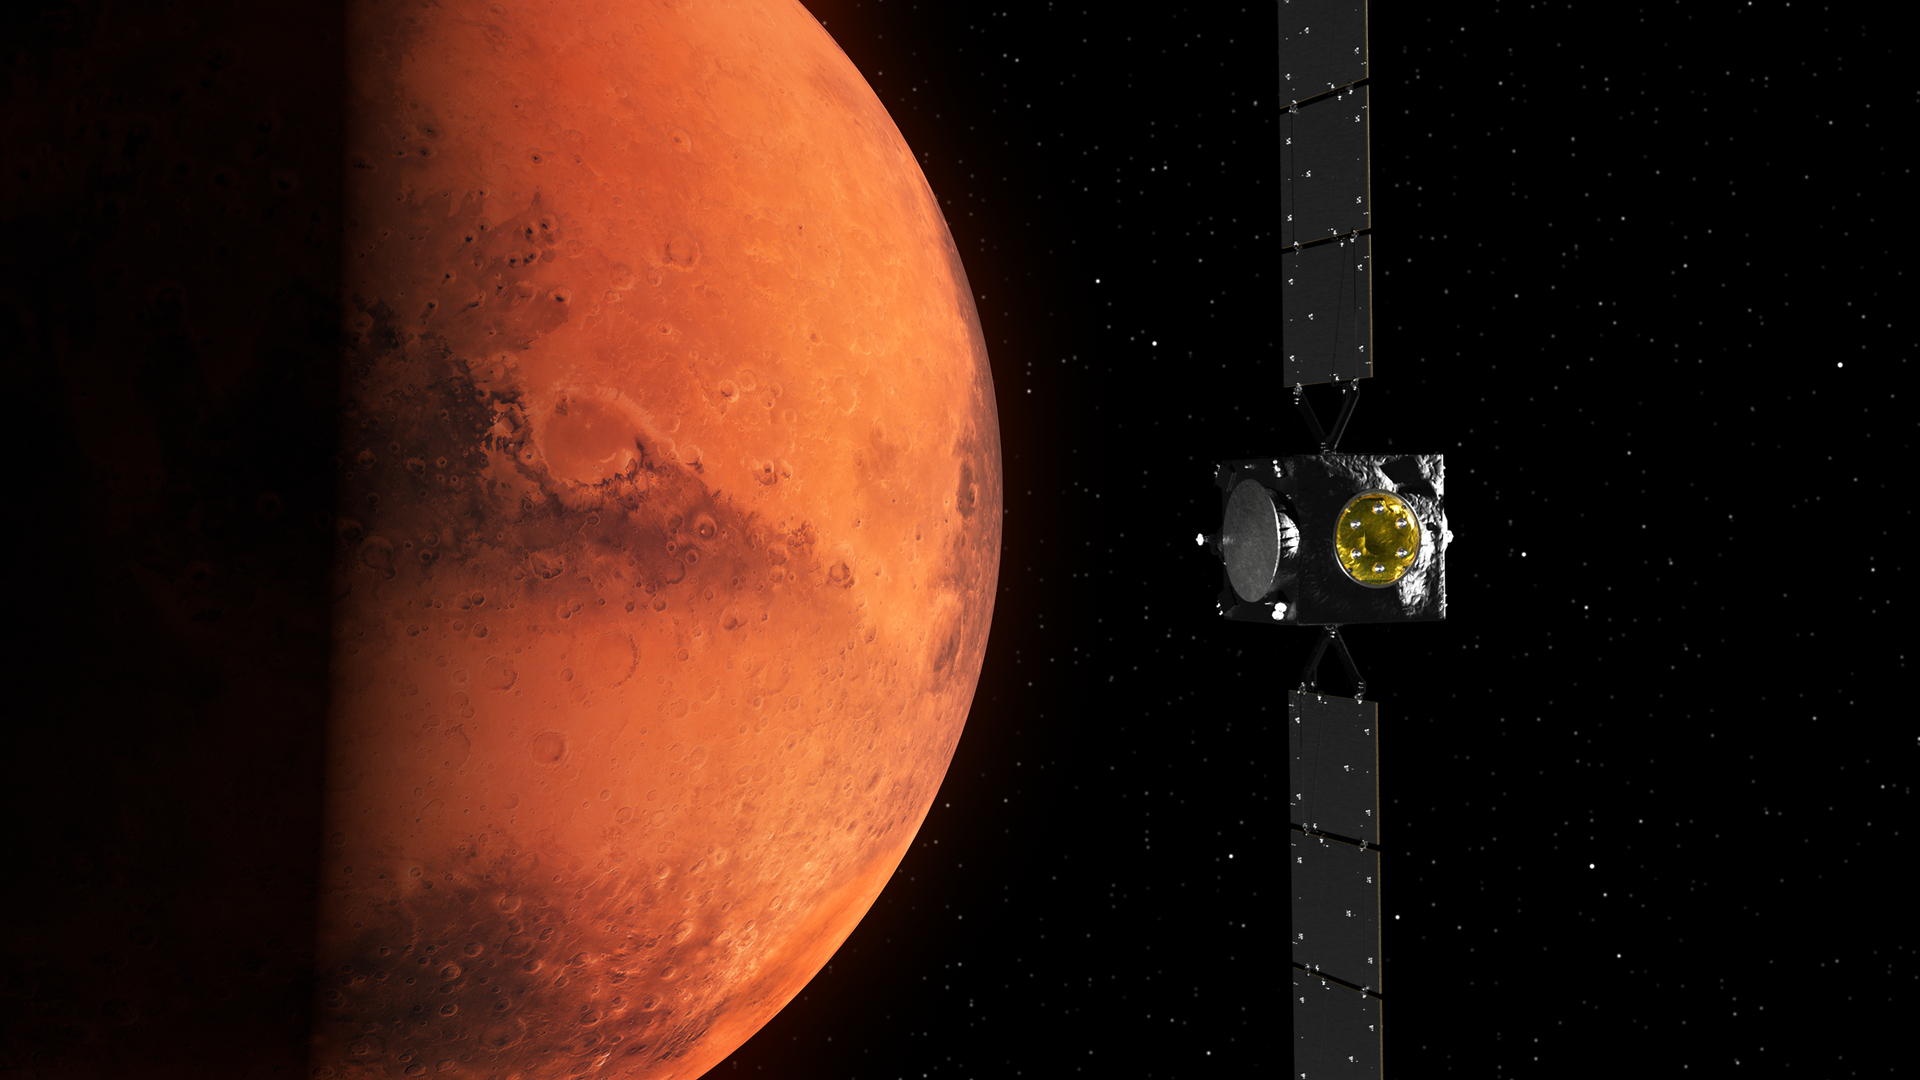 This spacecraft is headed to NASA's asteroid-crash aftermath — but first, it'll stop by Mars